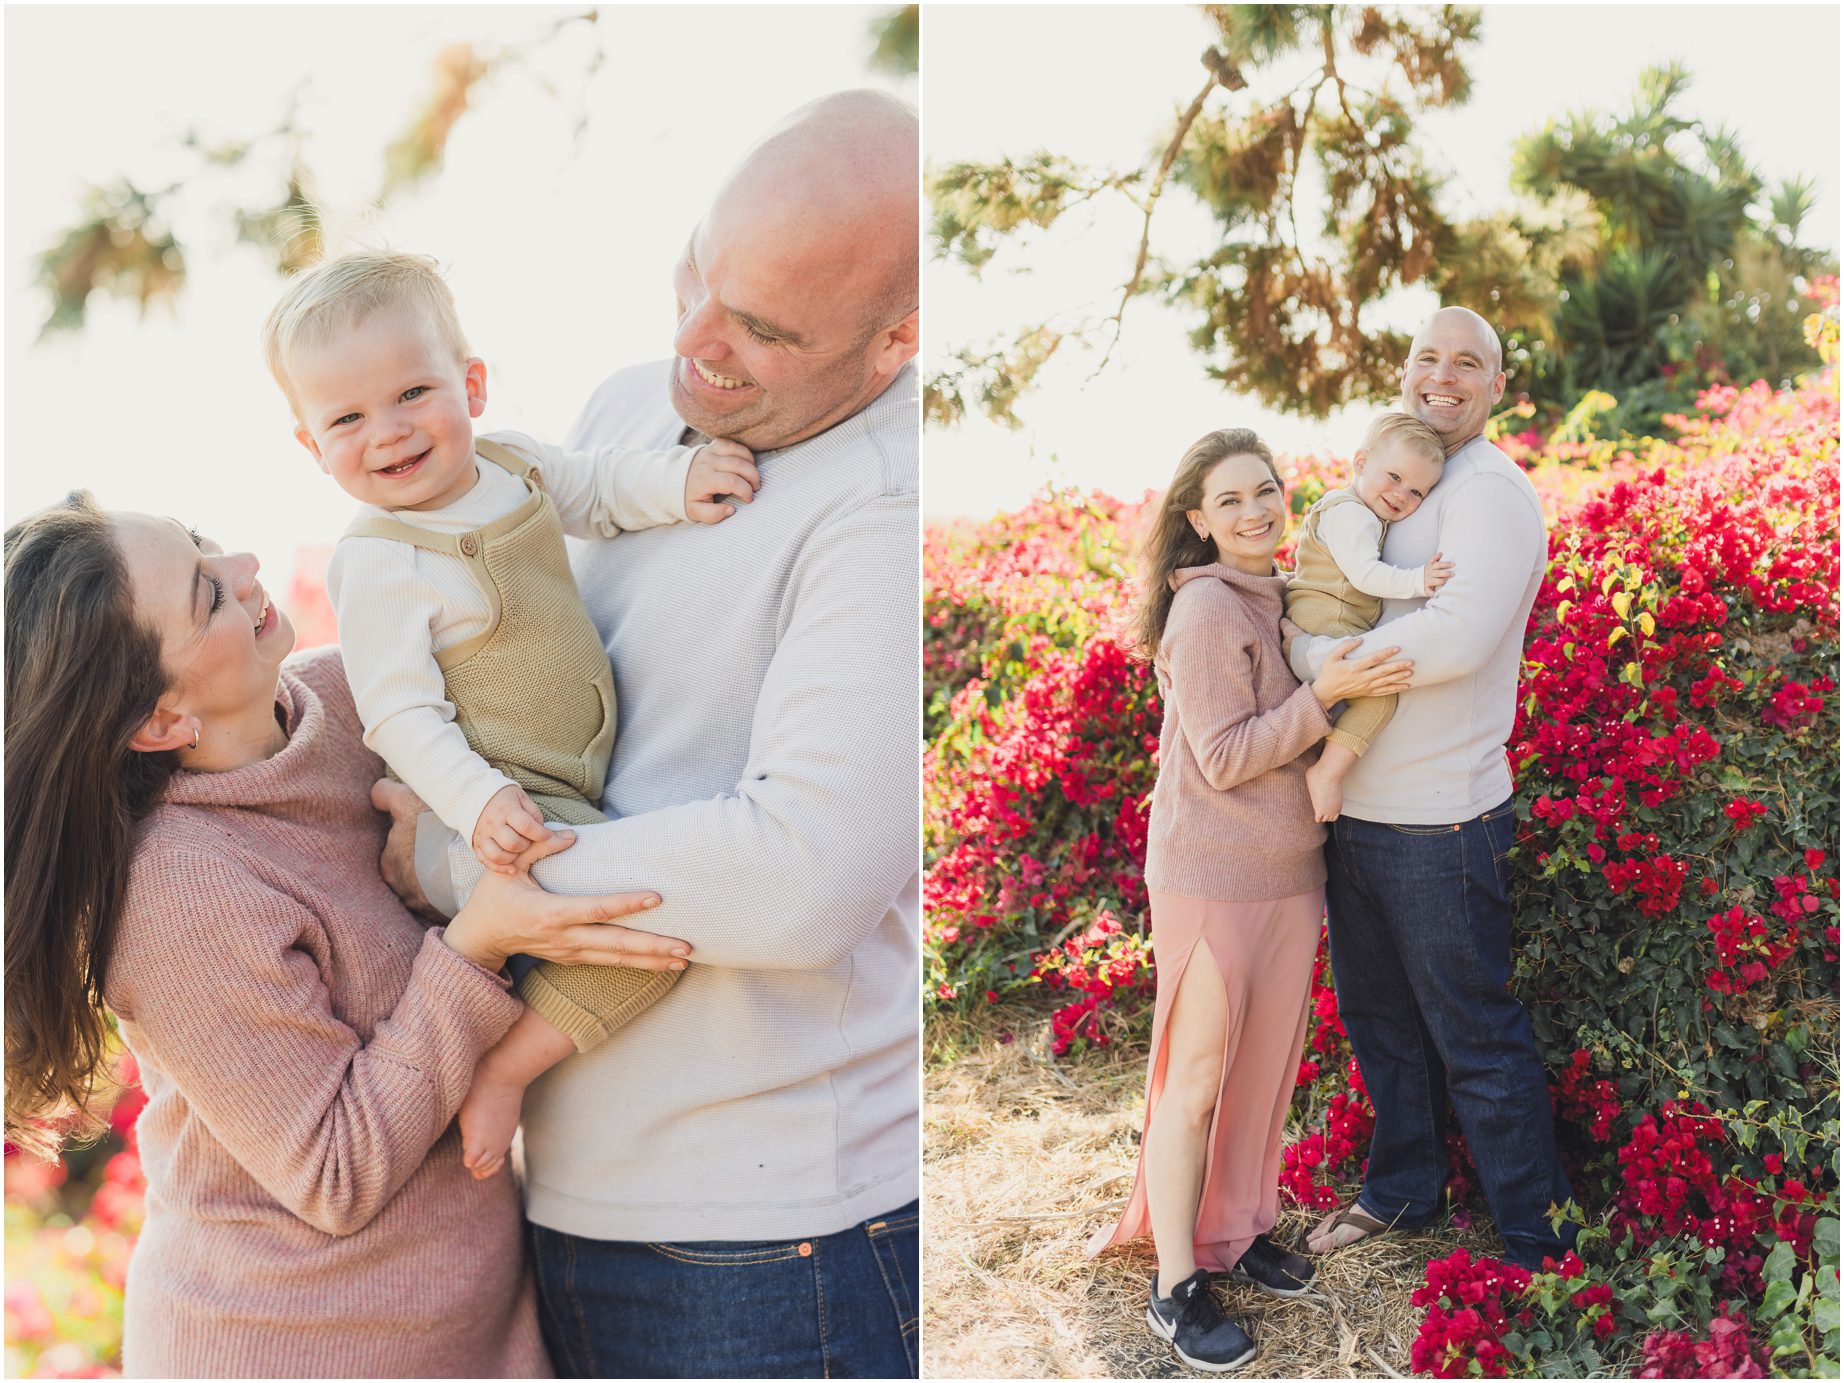 A family poses with their baby near bougainvillea in PALOS VERDES, California